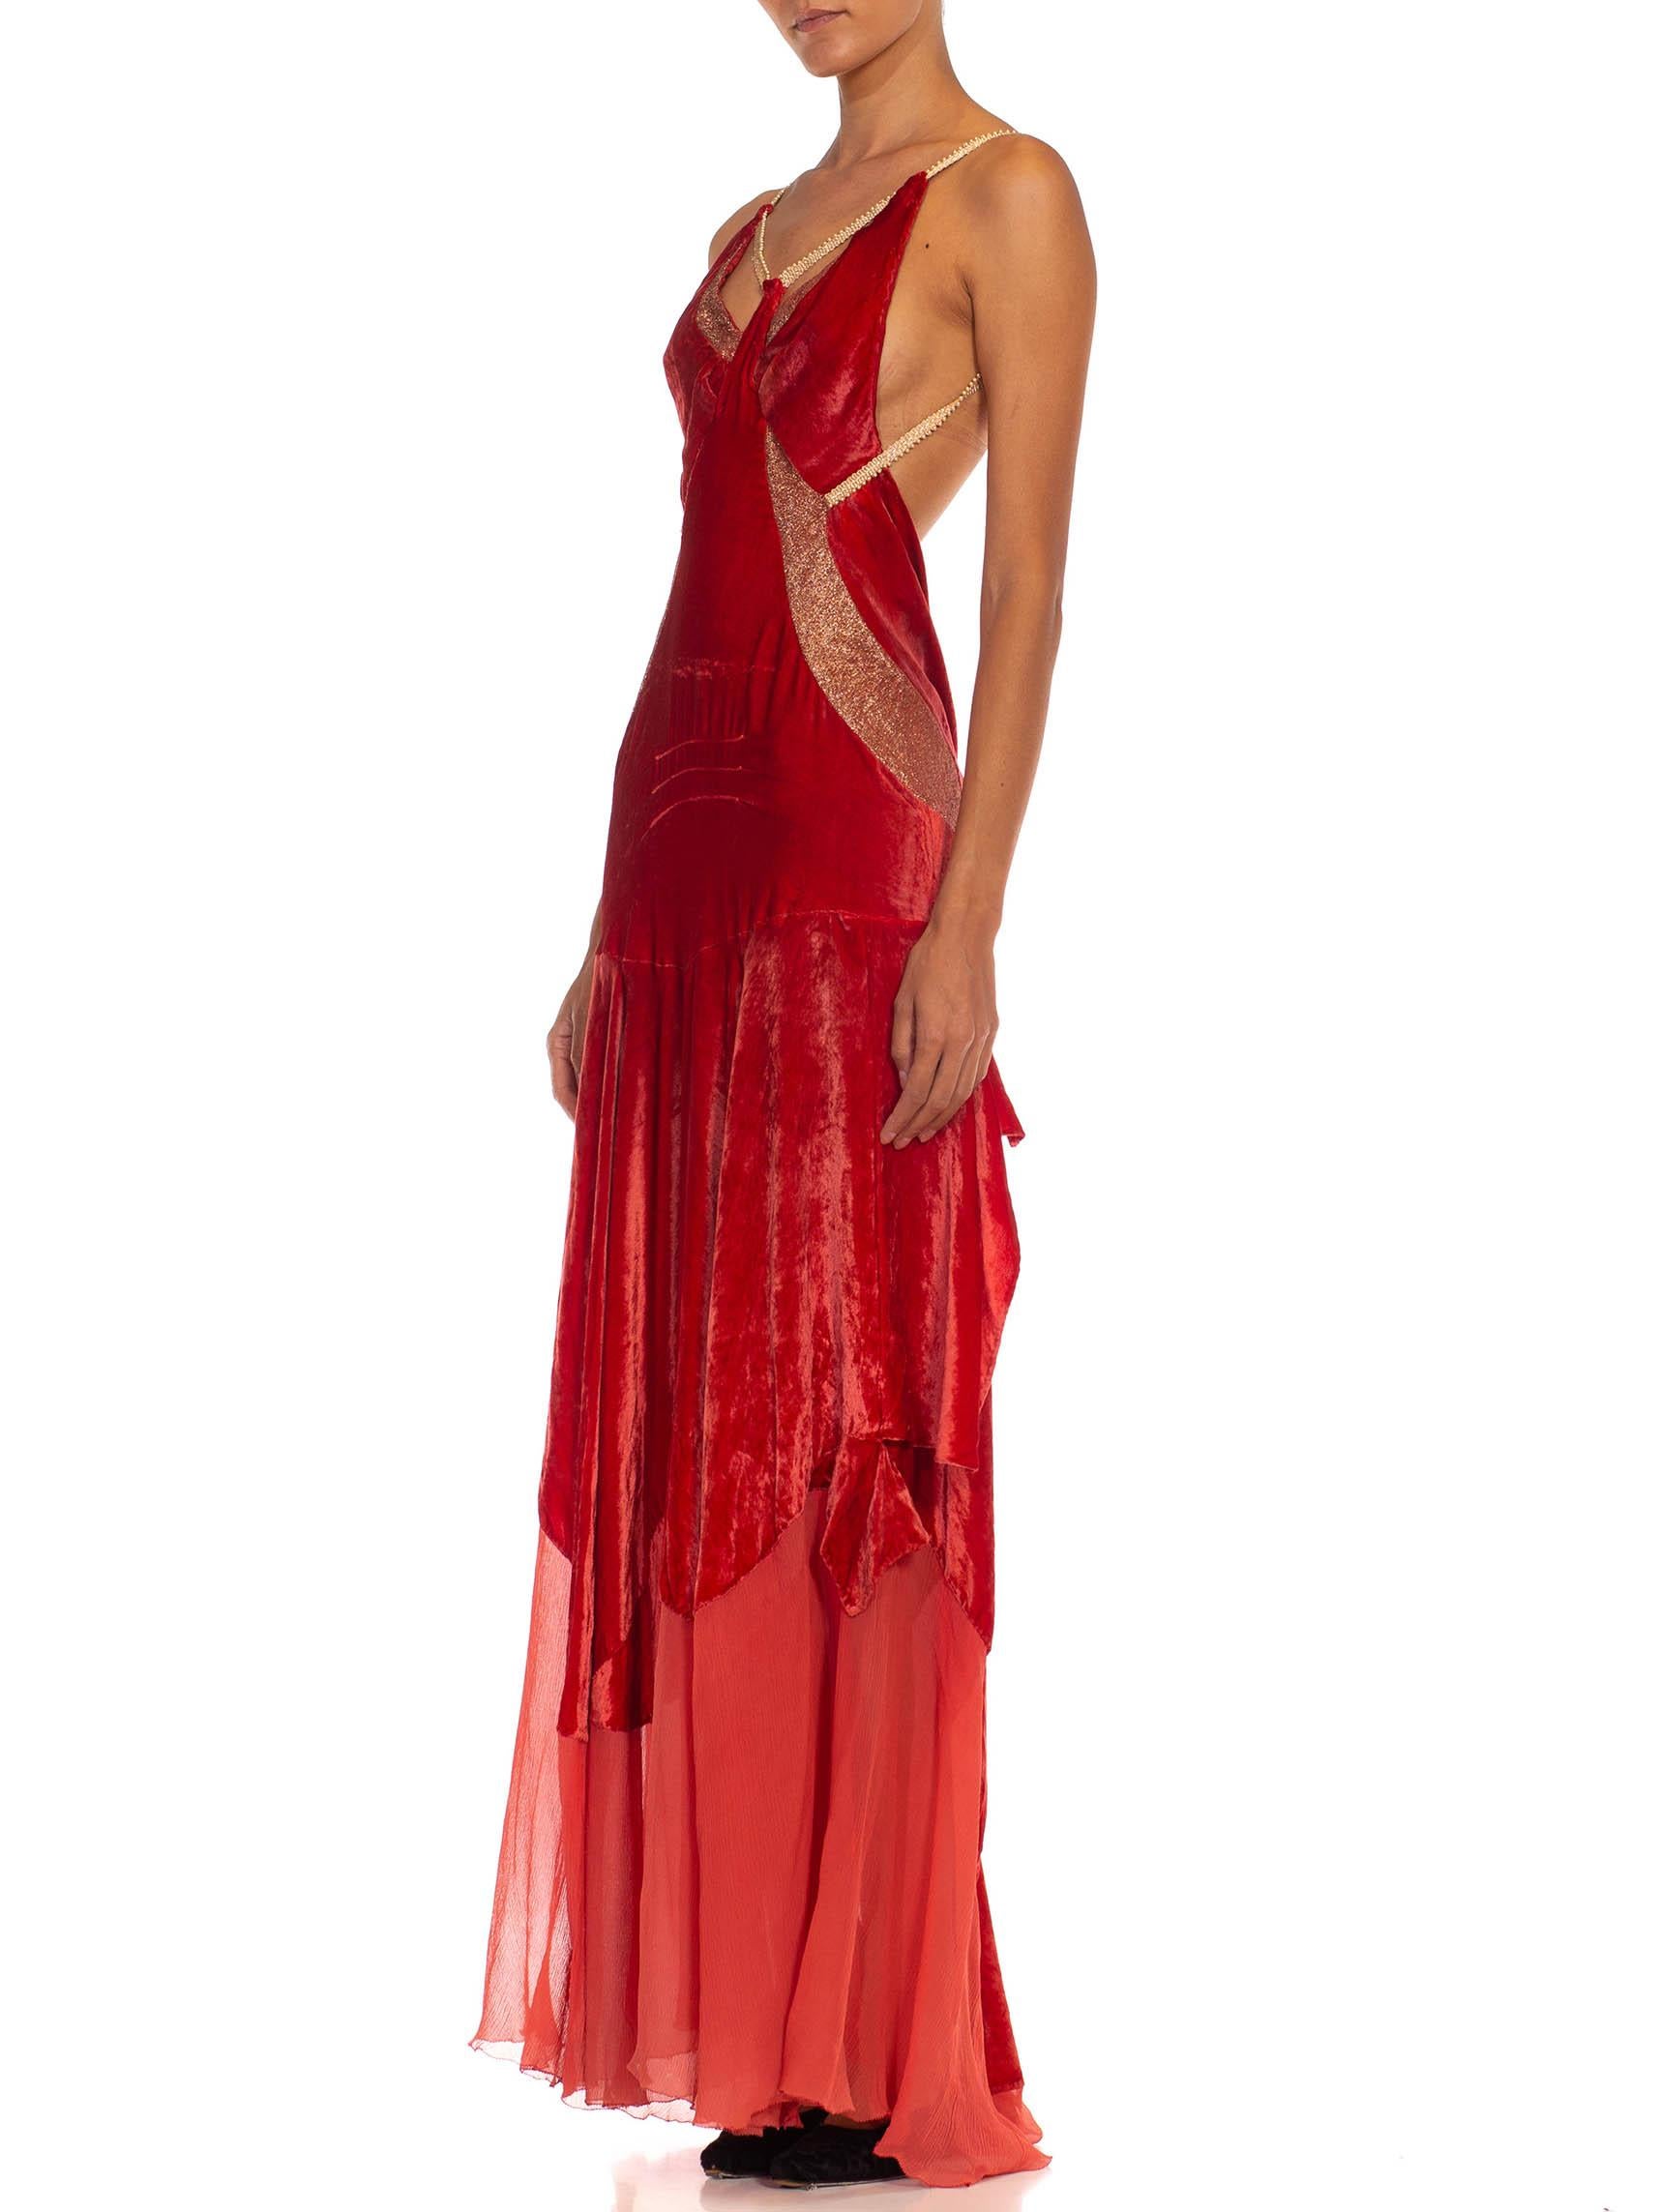 red satin backless dress